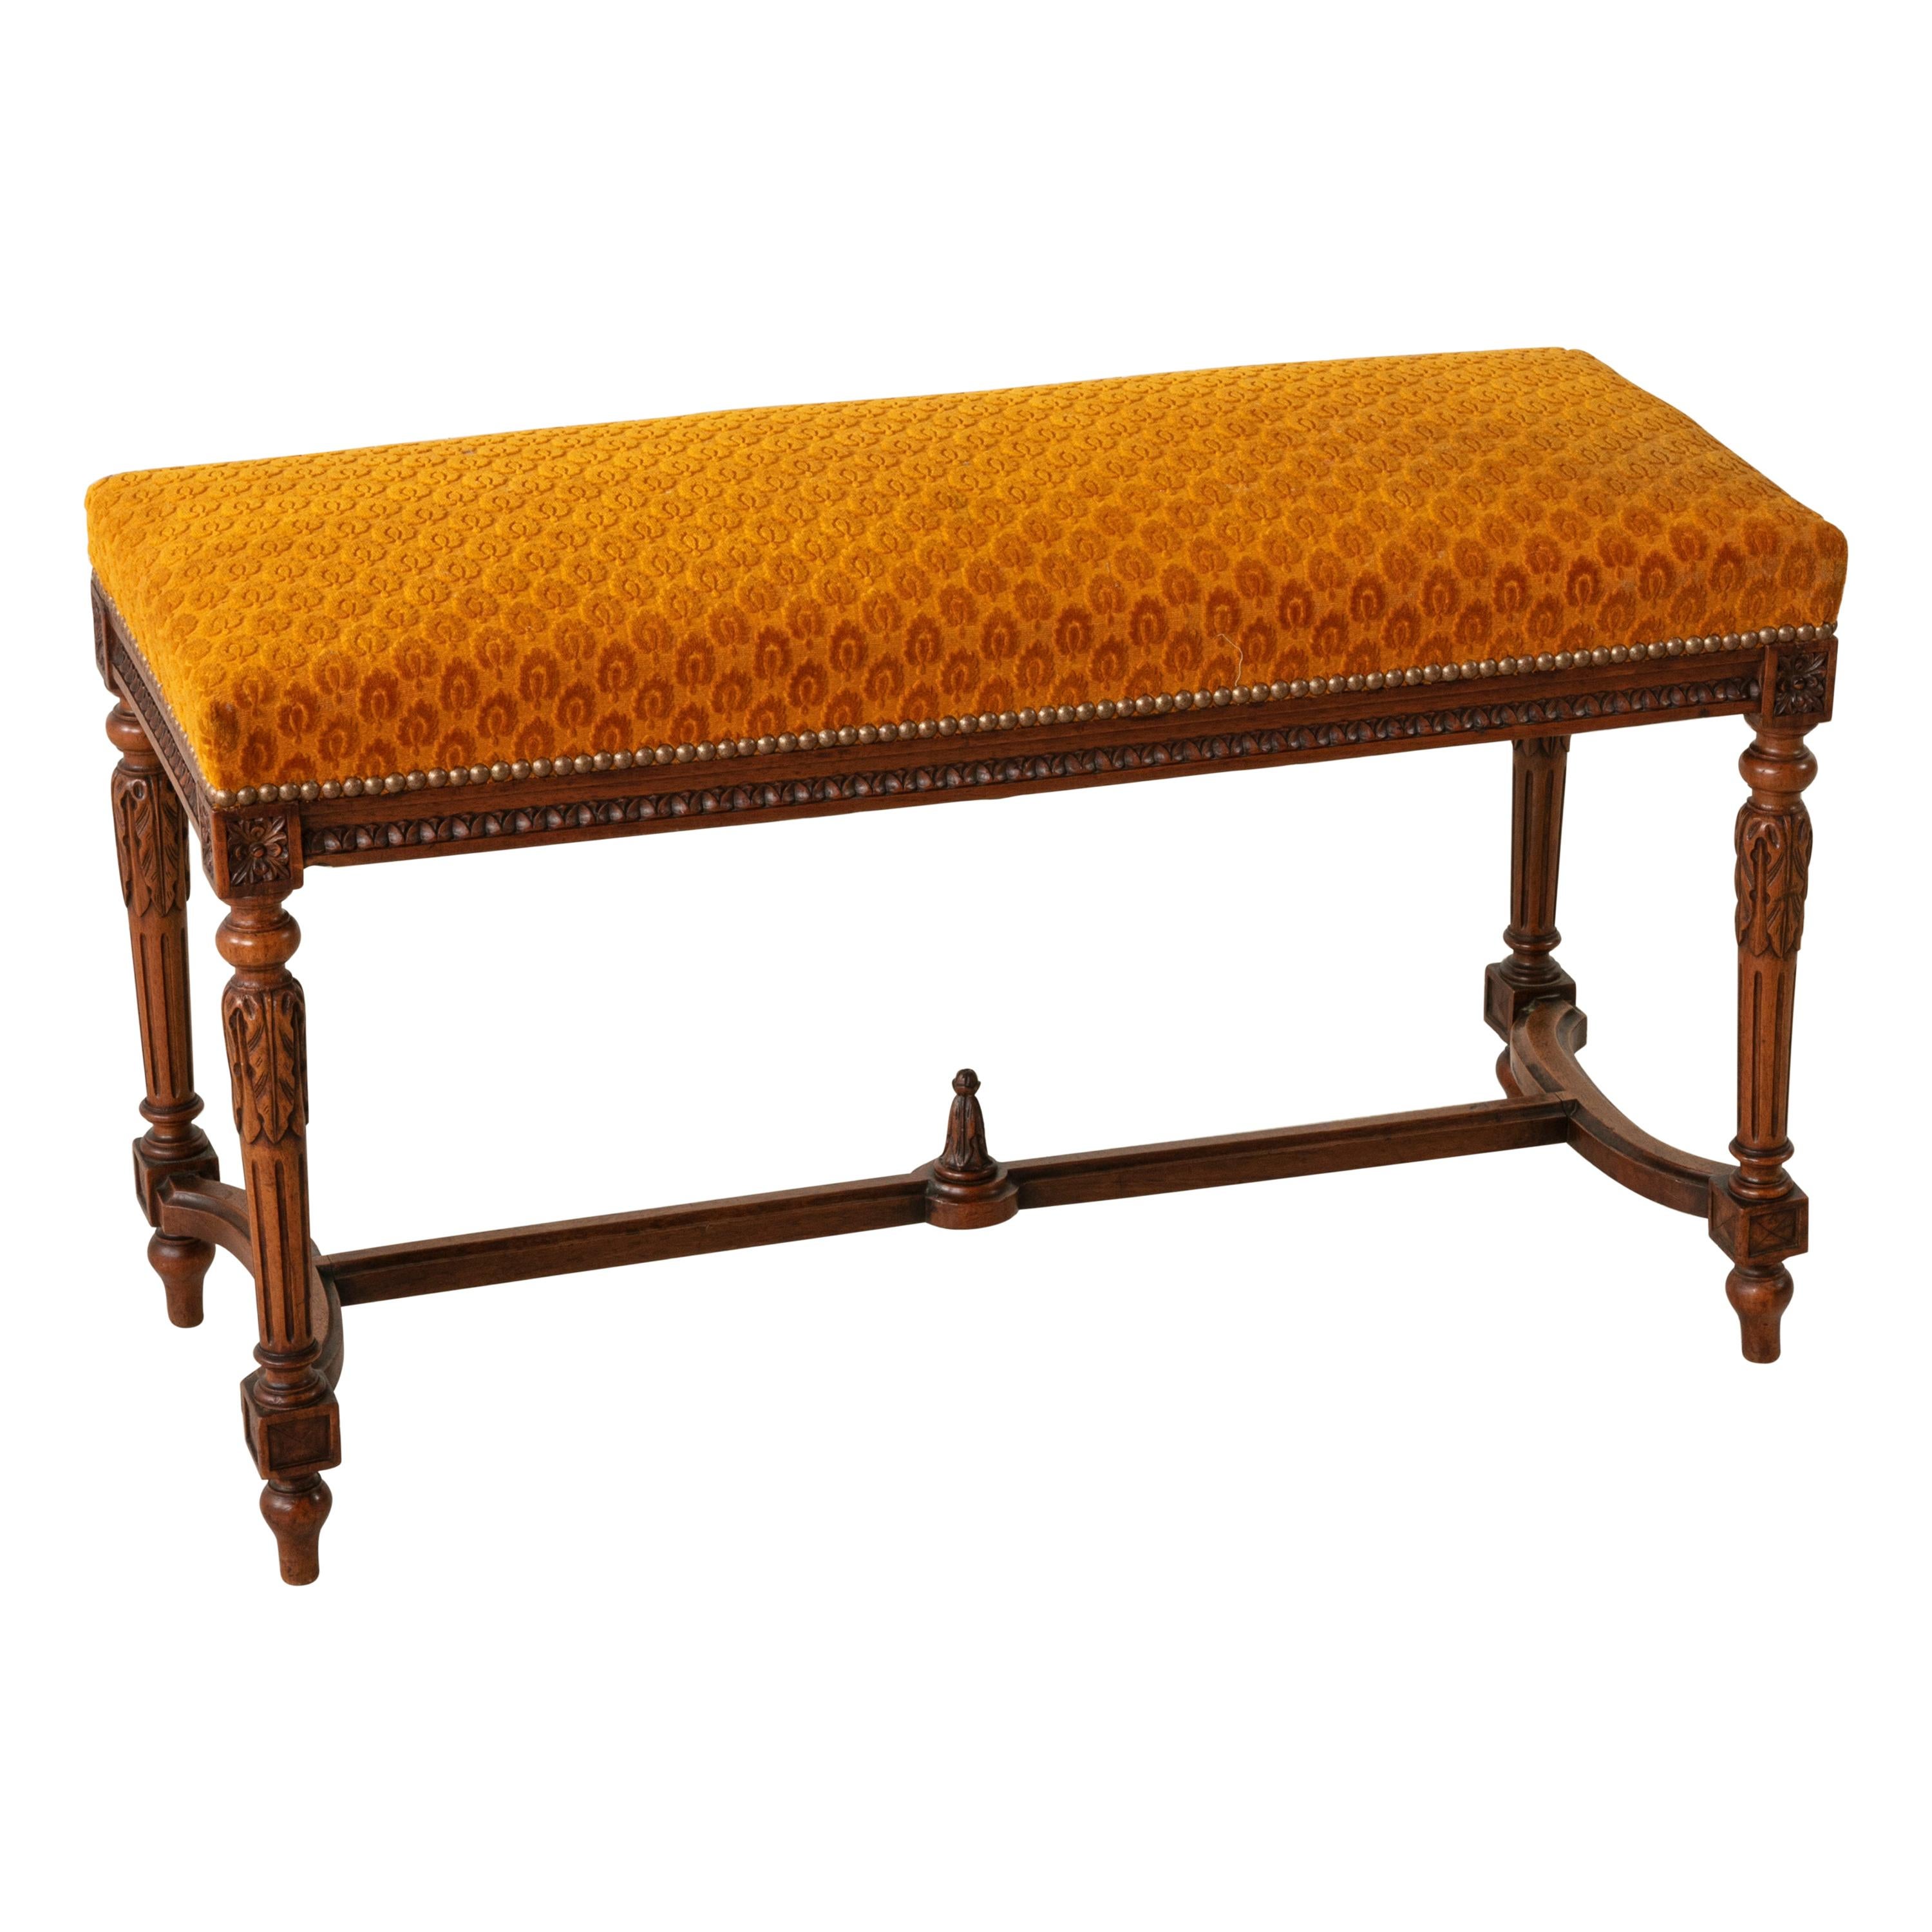 Late 19th Century Louis XVI Style Beechwood Bench or Banquette